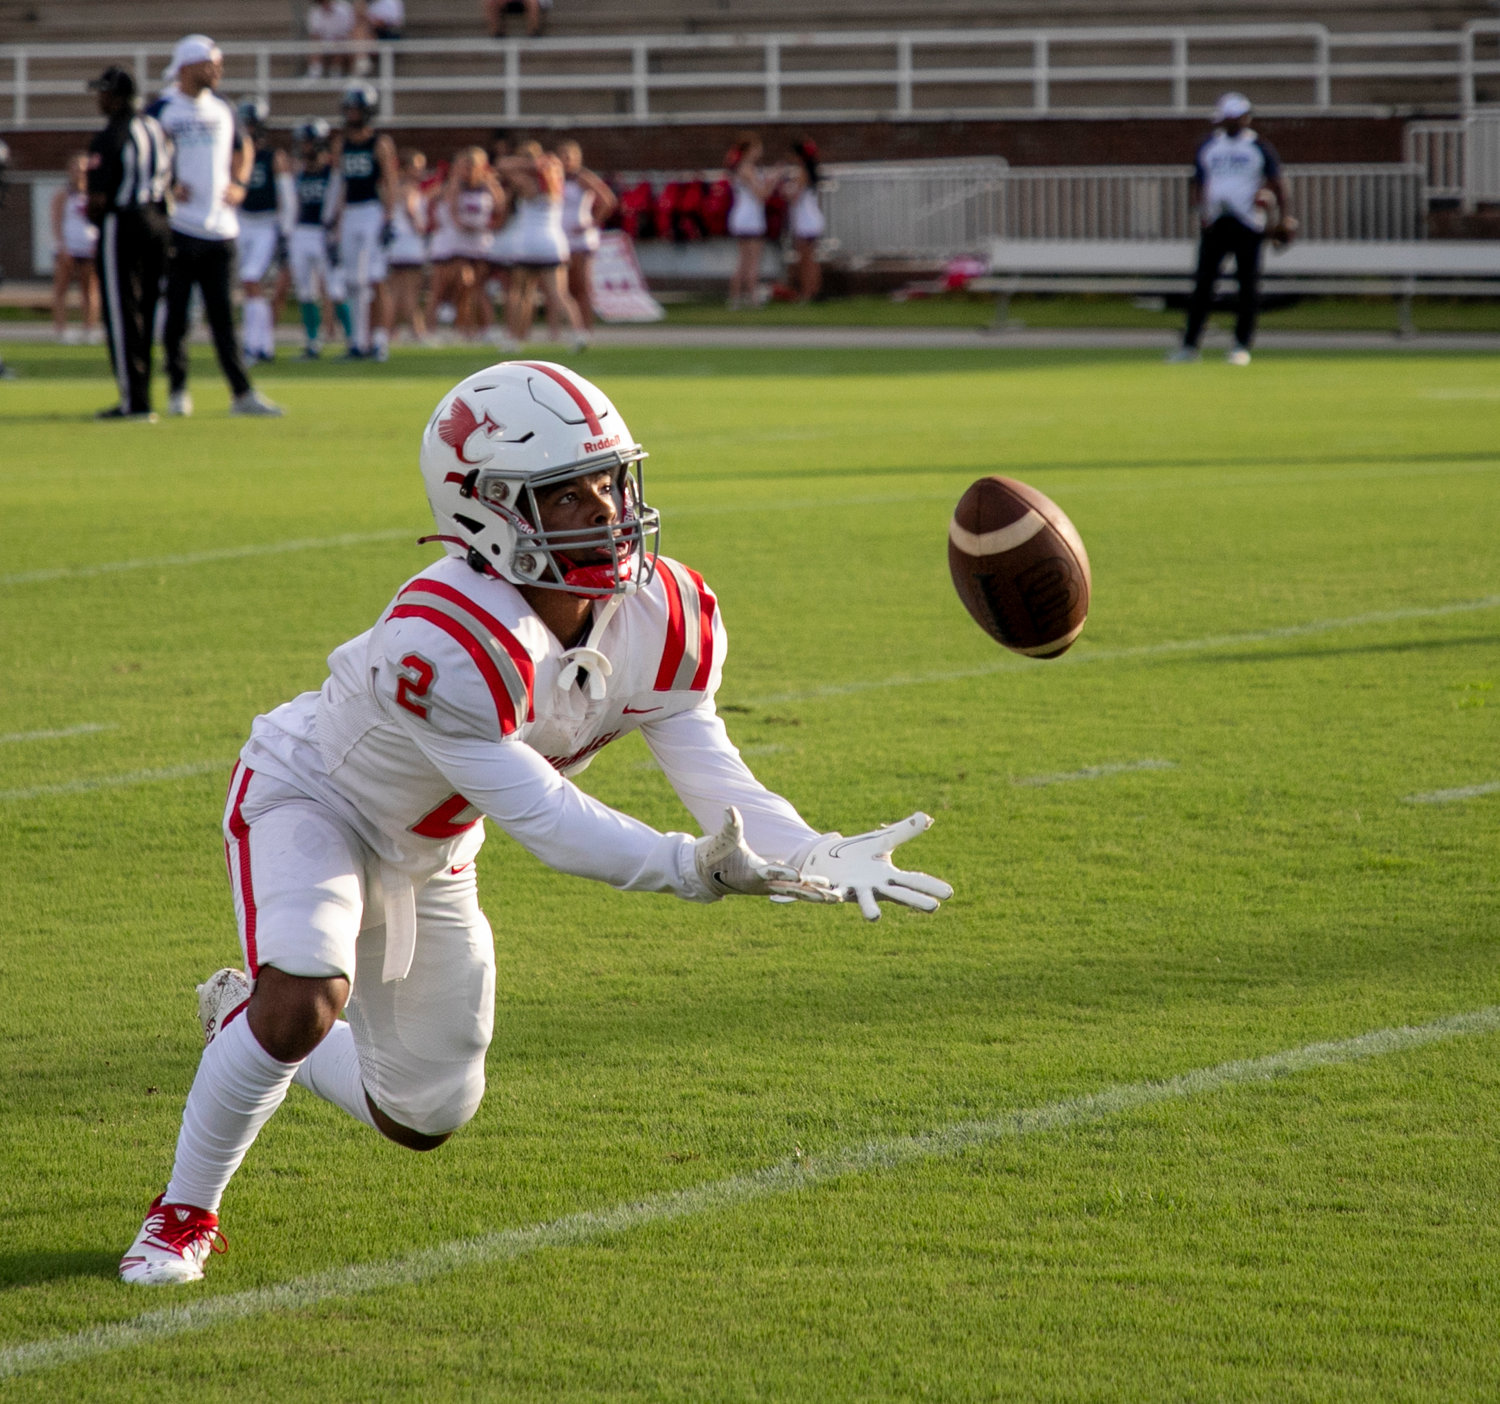 St. Michael senior Braylan Green looks in a punt attempt during warmups ahead of the Cardinals’ season-opening contest against the Gulf Shores Dolphins Aug. 18. Green helped St. Michael rack up 281 points on the season, including a program-record 49 points in the win over Orange Beach.